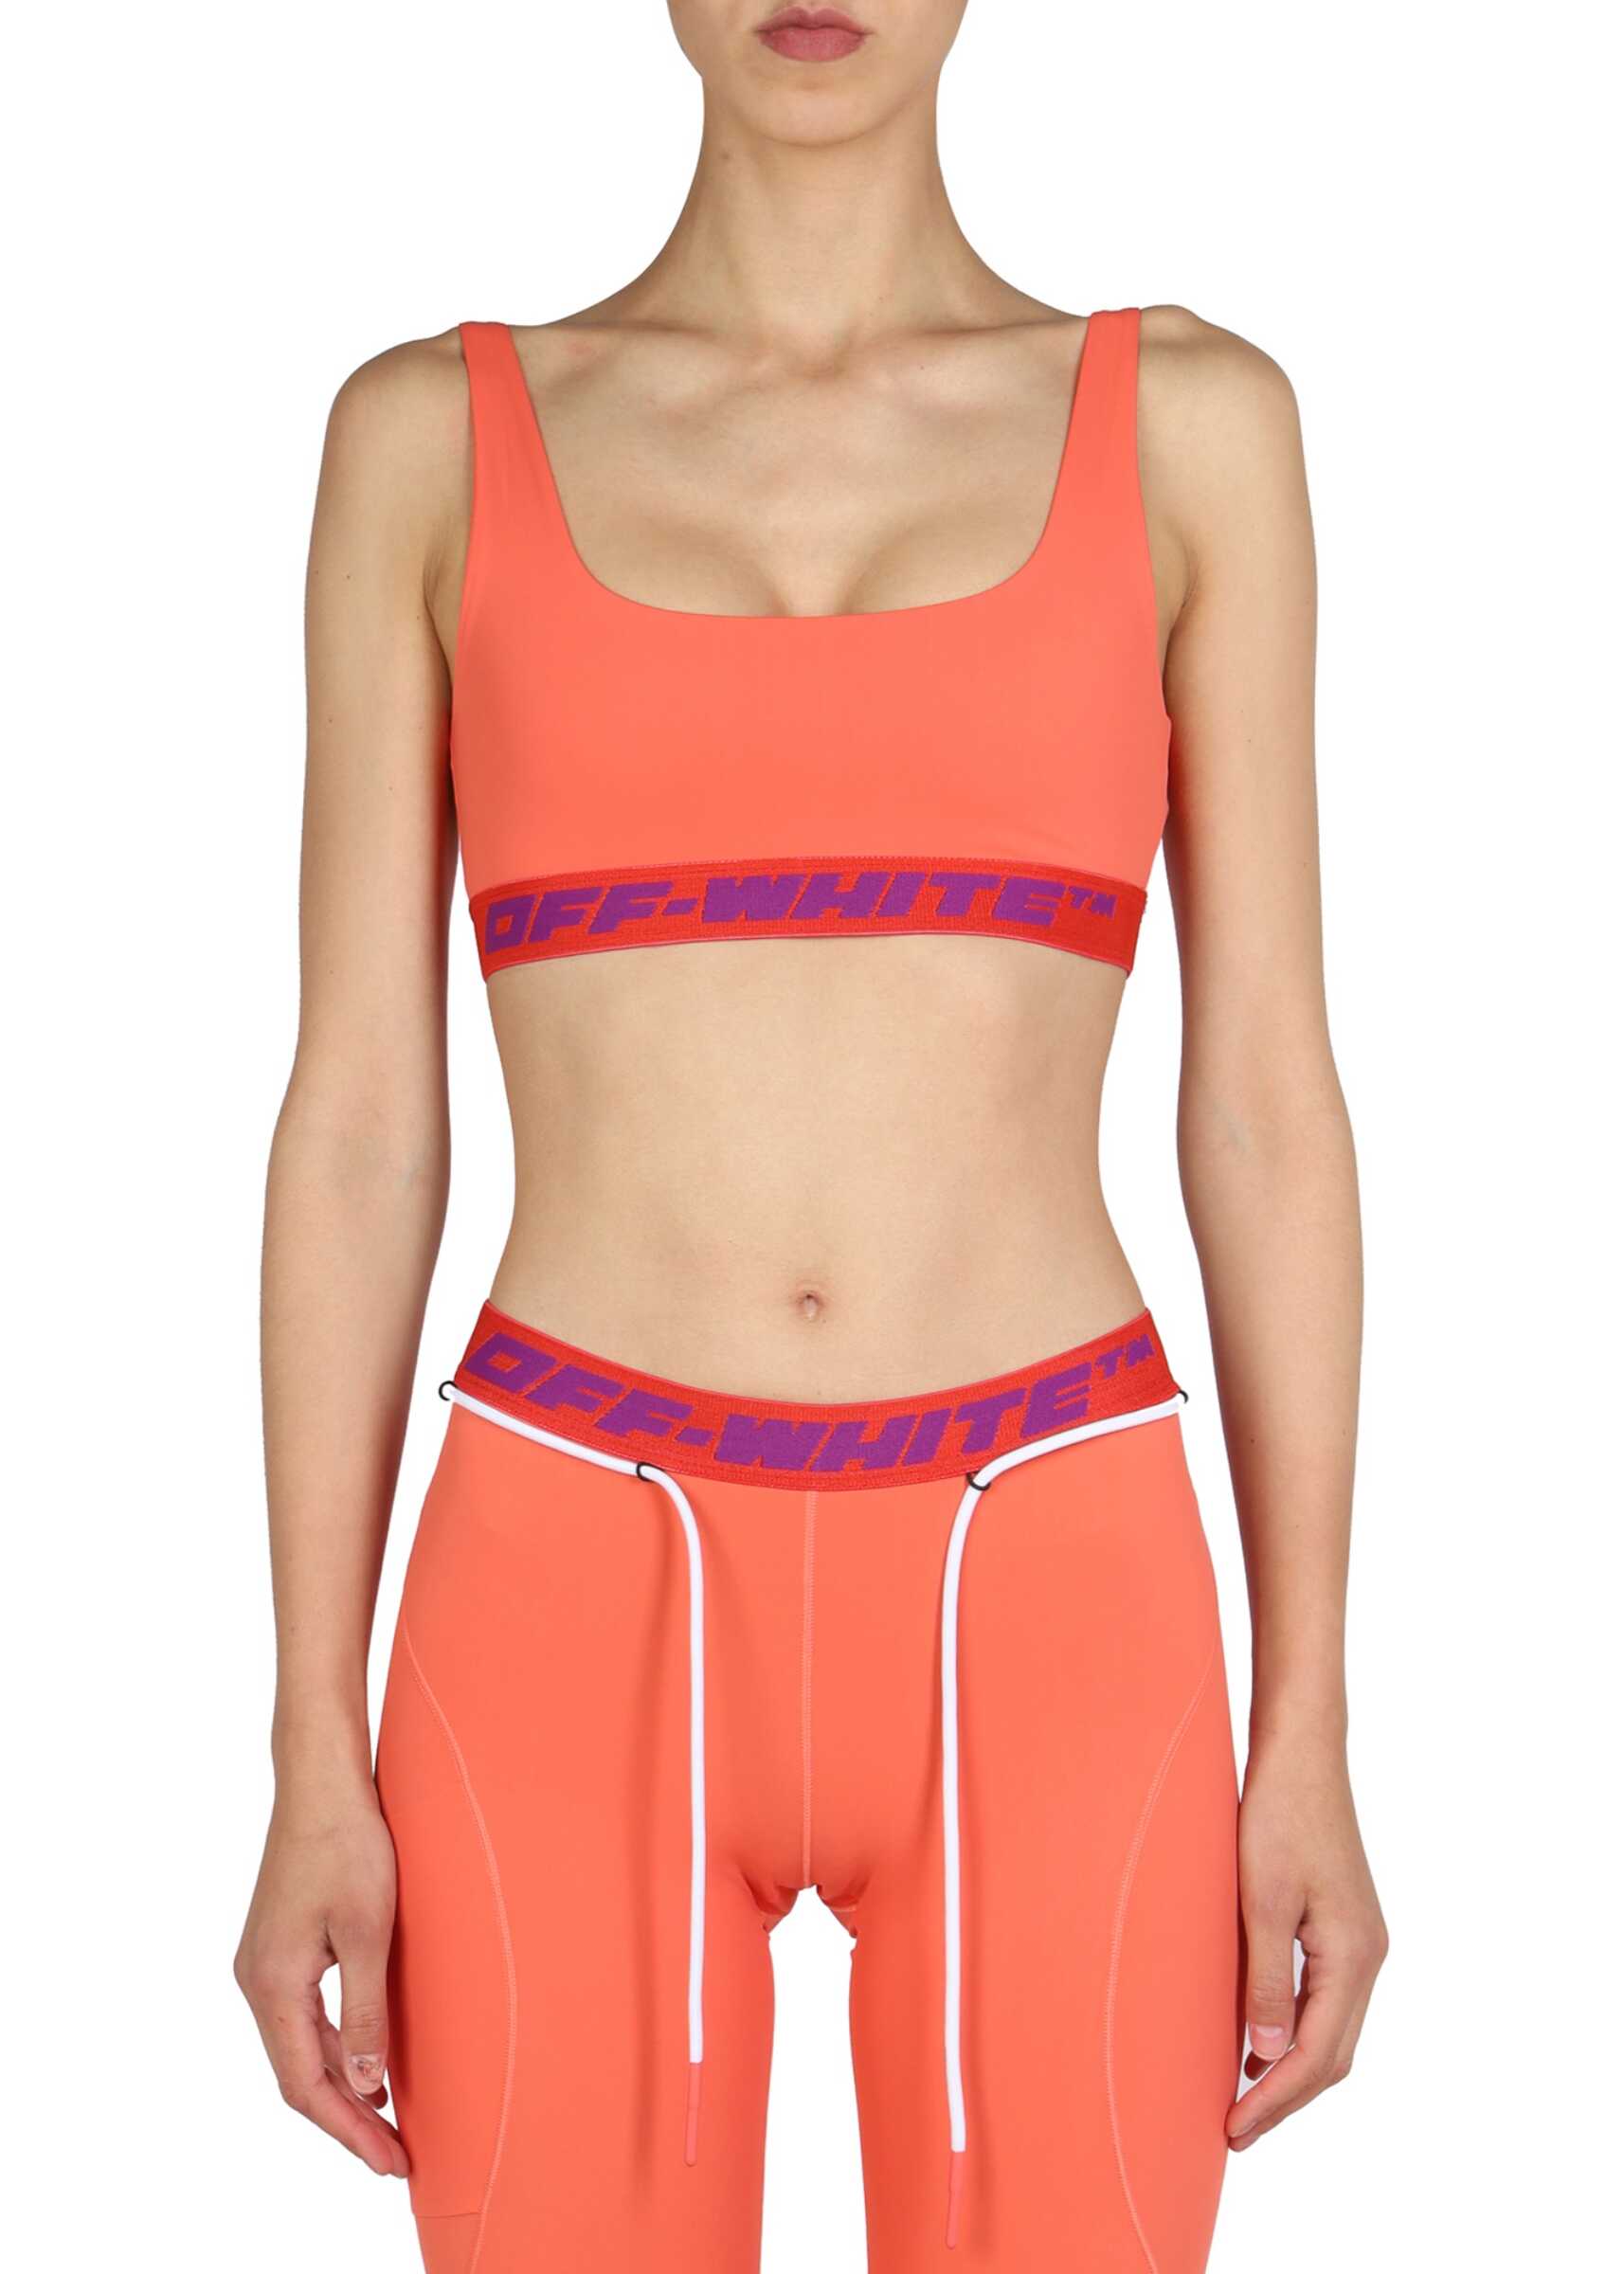 Off-White Top With Logoed Band ORANGE image0